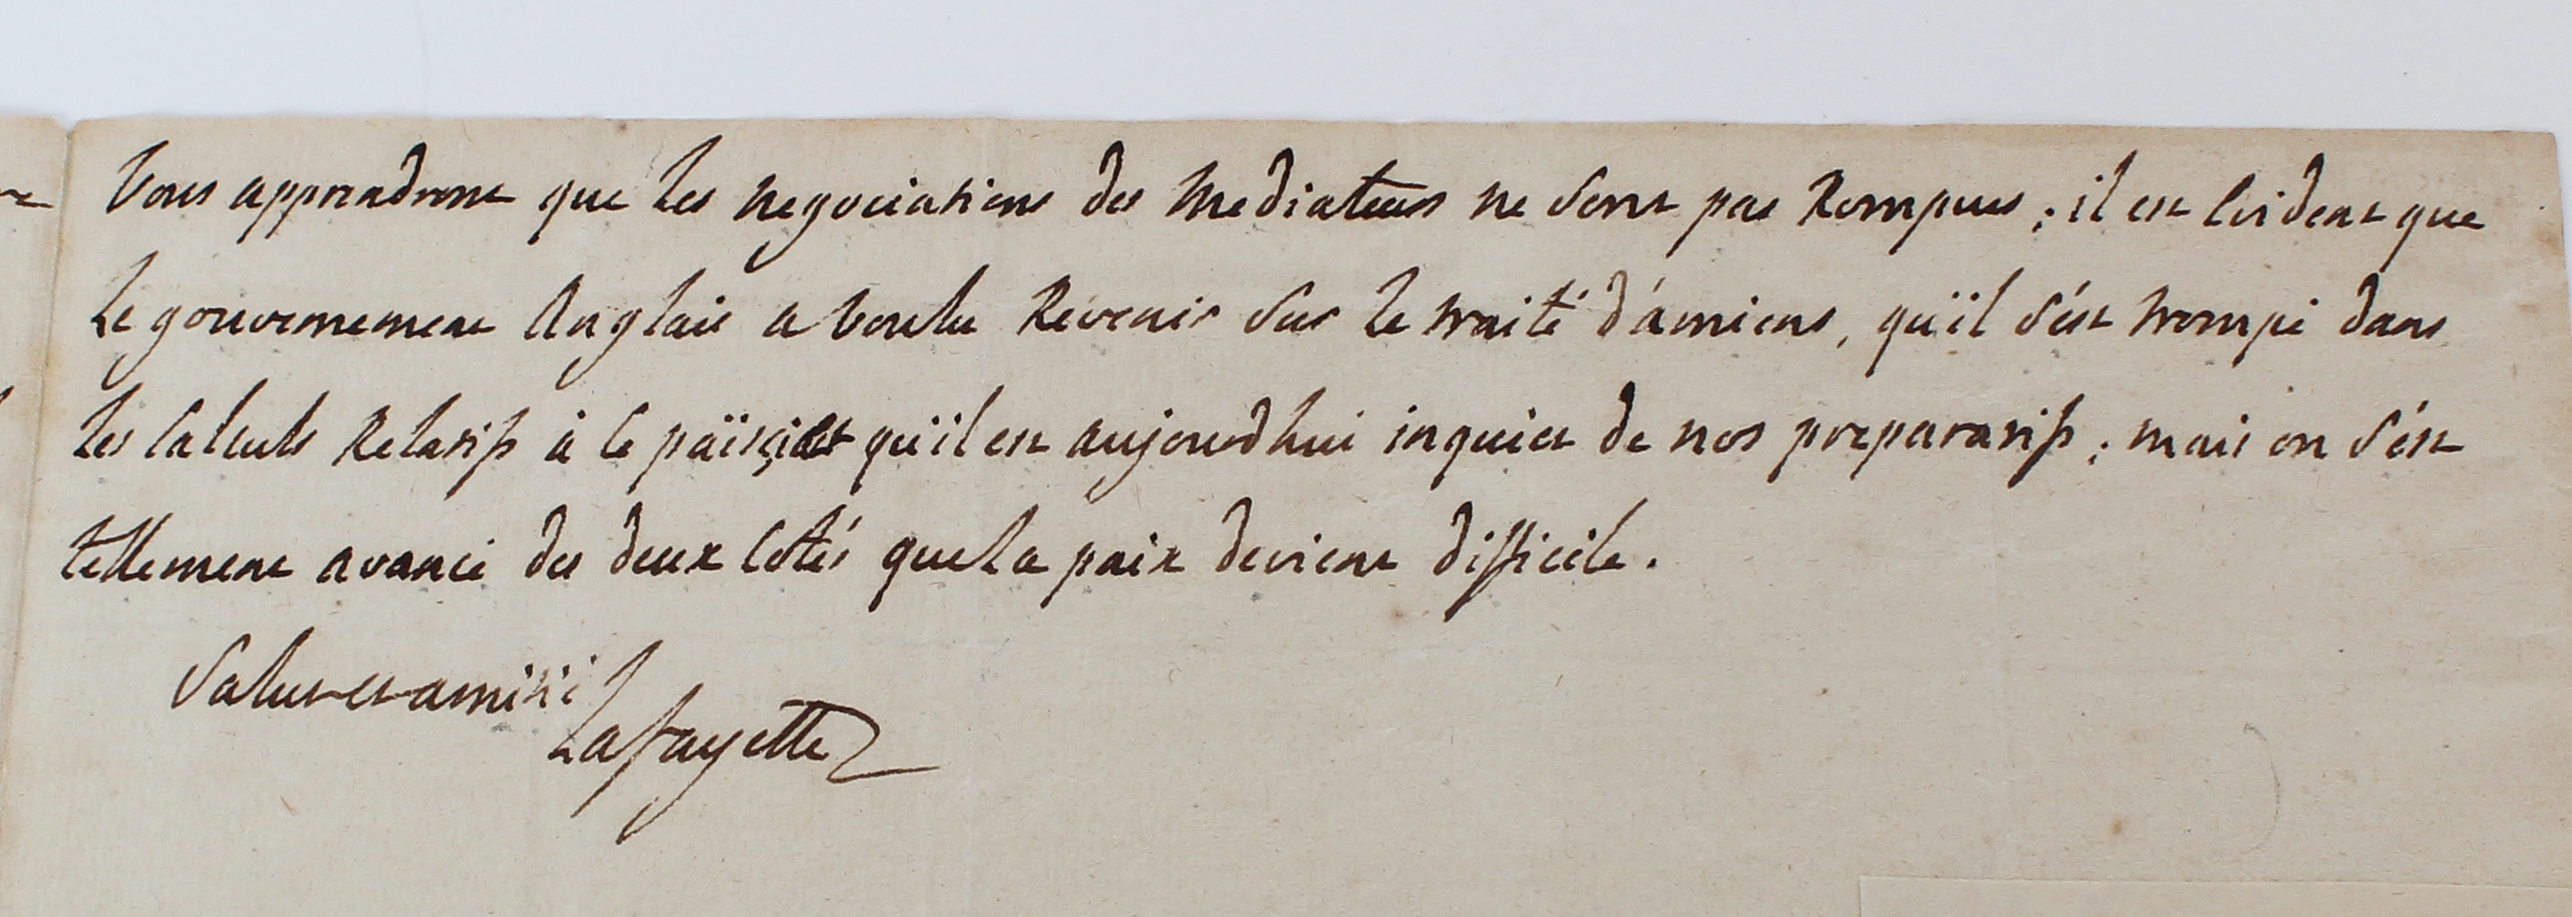 Letter Written And Signed By Lafayette 1803 - Image 3 of 4